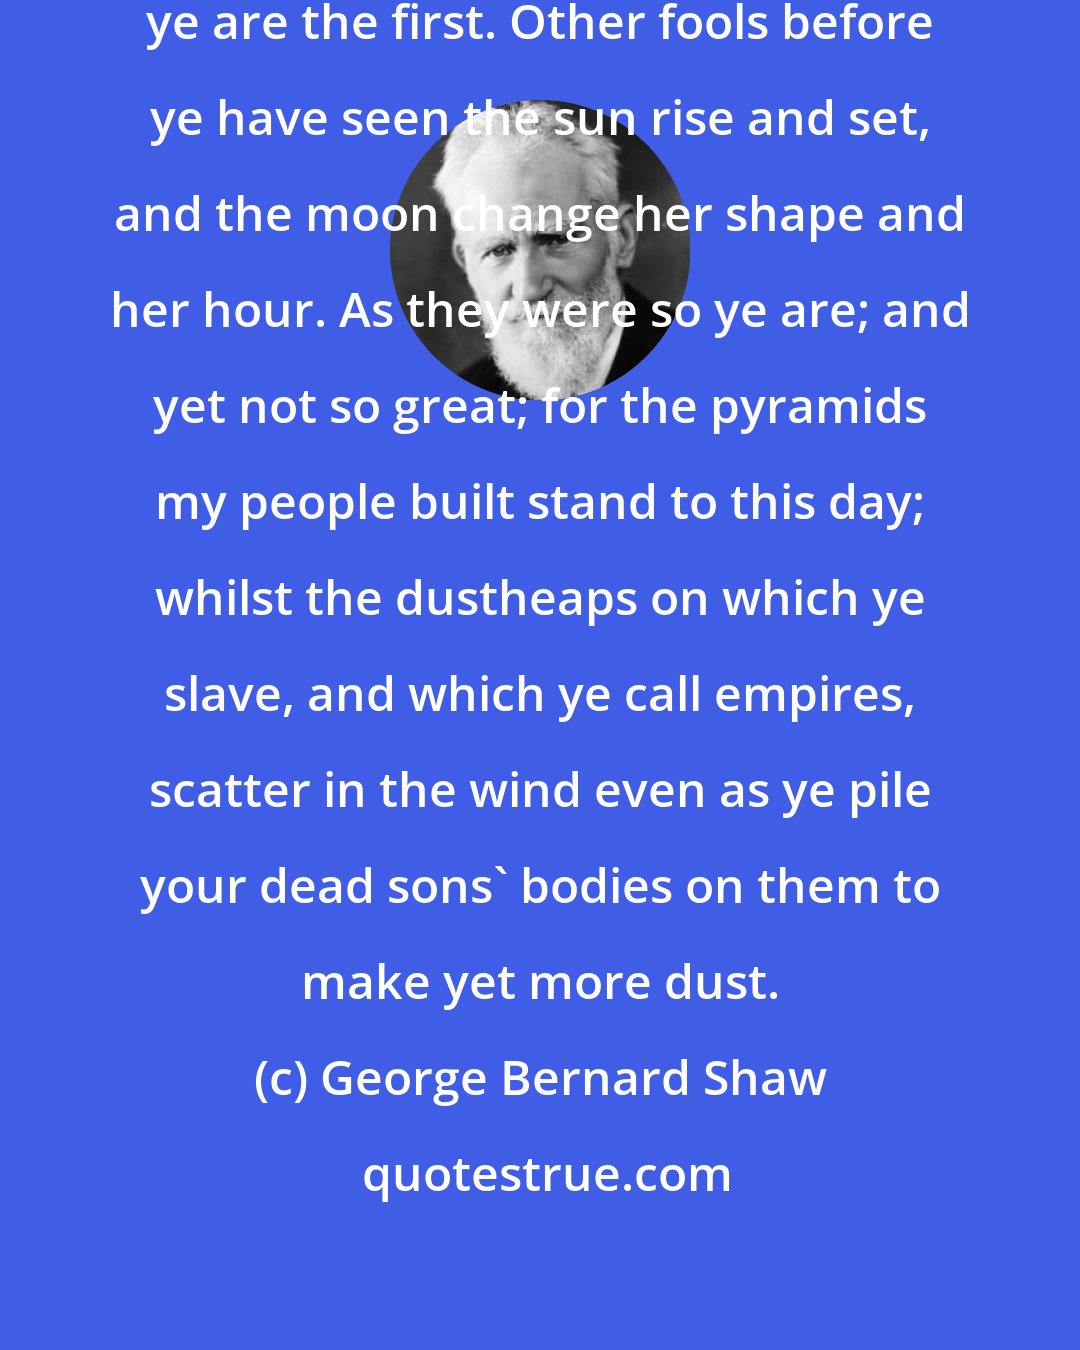 George Bernard Shaw: Ye poor posterity, think not that ye are the first. Other fools before ye have seen the sun rise and set, and the moon change her shape and her hour. As they were so ye are; and yet not so great; for the pyramids my people built stand to this day; whilst the dustheaps on which ye slave, and which ye call empires, scatter in the wind even as ye pile your dead sons' bodies on them to make yet more dust.